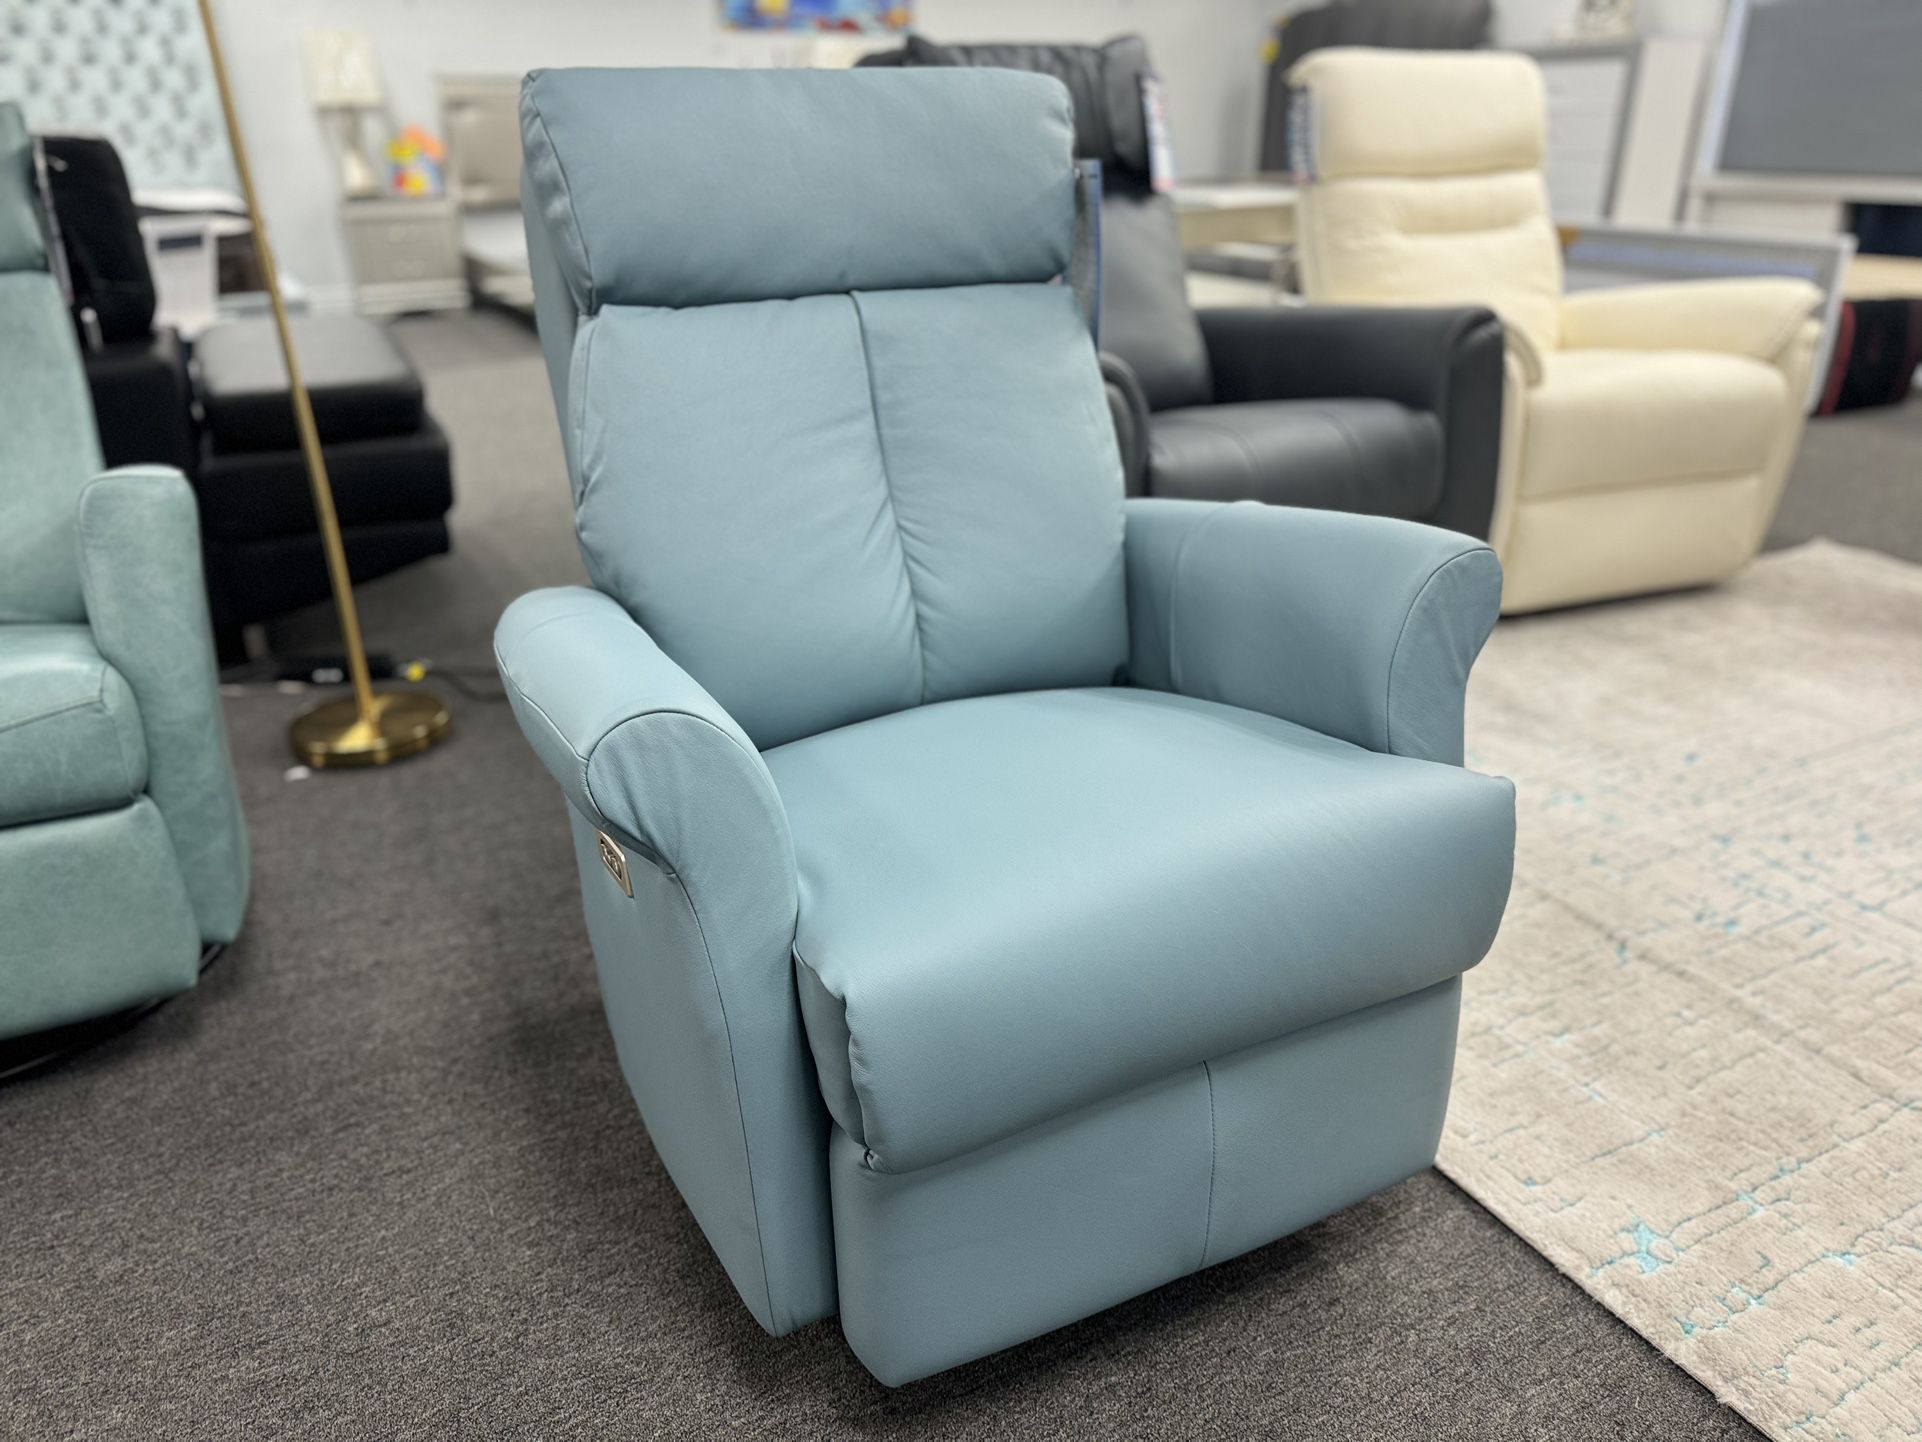 😄😄 Recliners Recliners Recliners All On Special !! Leather Power Rockers Swivel  Lift Recliners & Message Chairs On special starting @ $199 😄😄